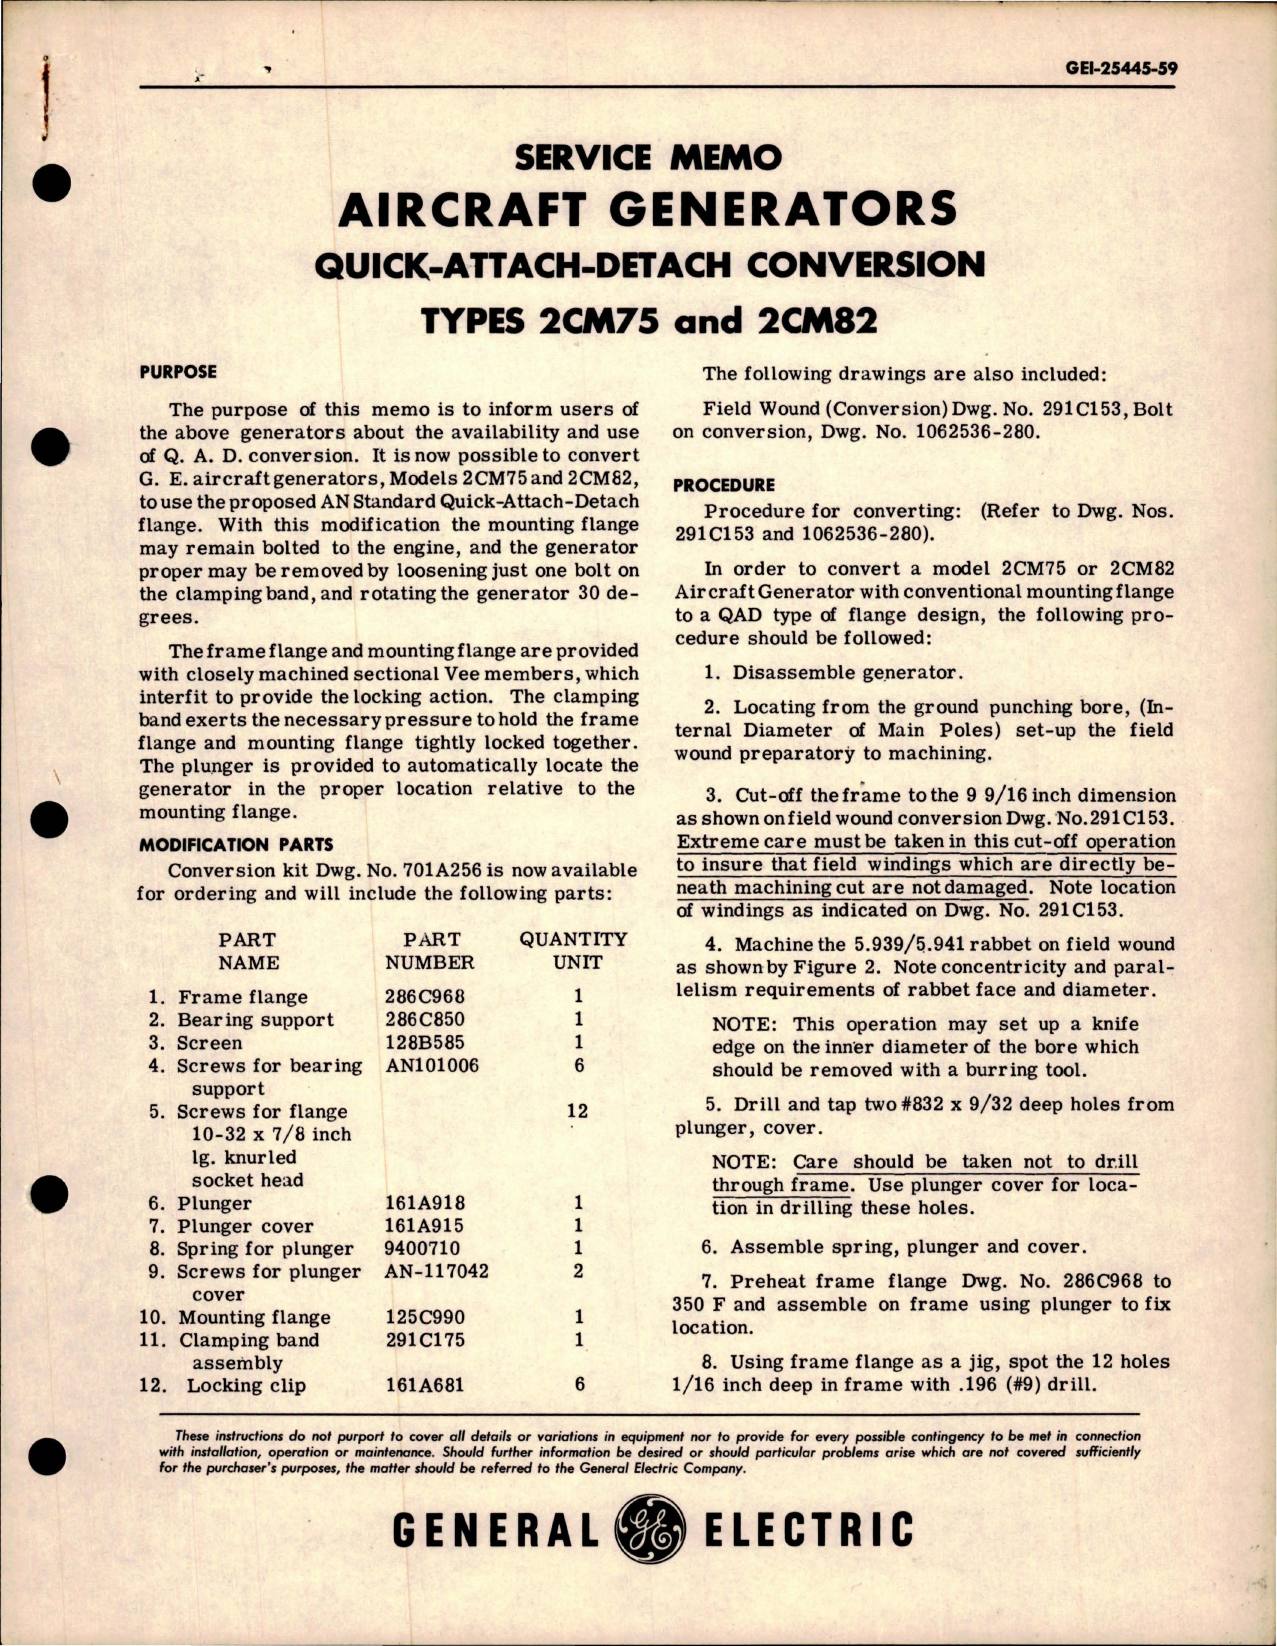 Sample page 1 from AirCorps Library document: Service Memo for Aircraft Generators Quick-Attach-Setach Conversion - Type 2CM75 and 2CM82